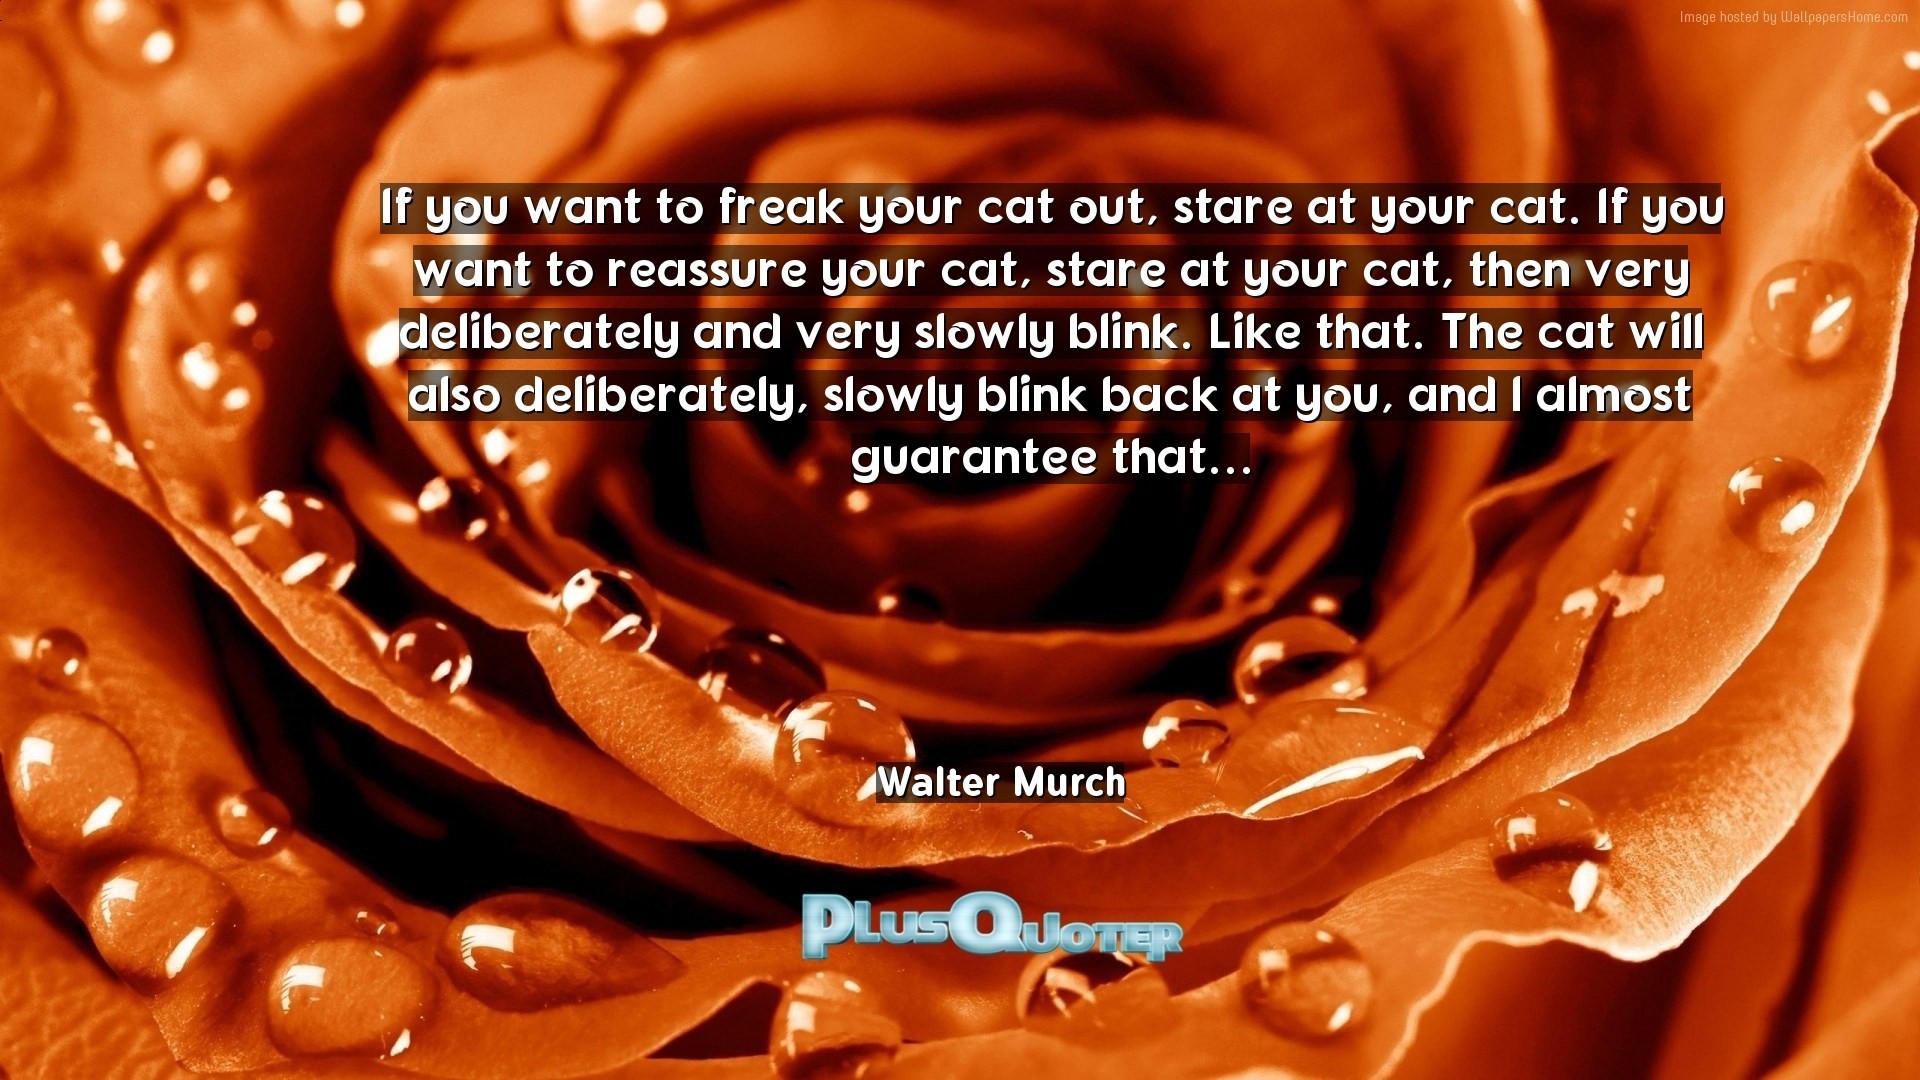 1920x1080 Download Wallpaper with inspirational Quotes- "If you want to freak your  cat out,